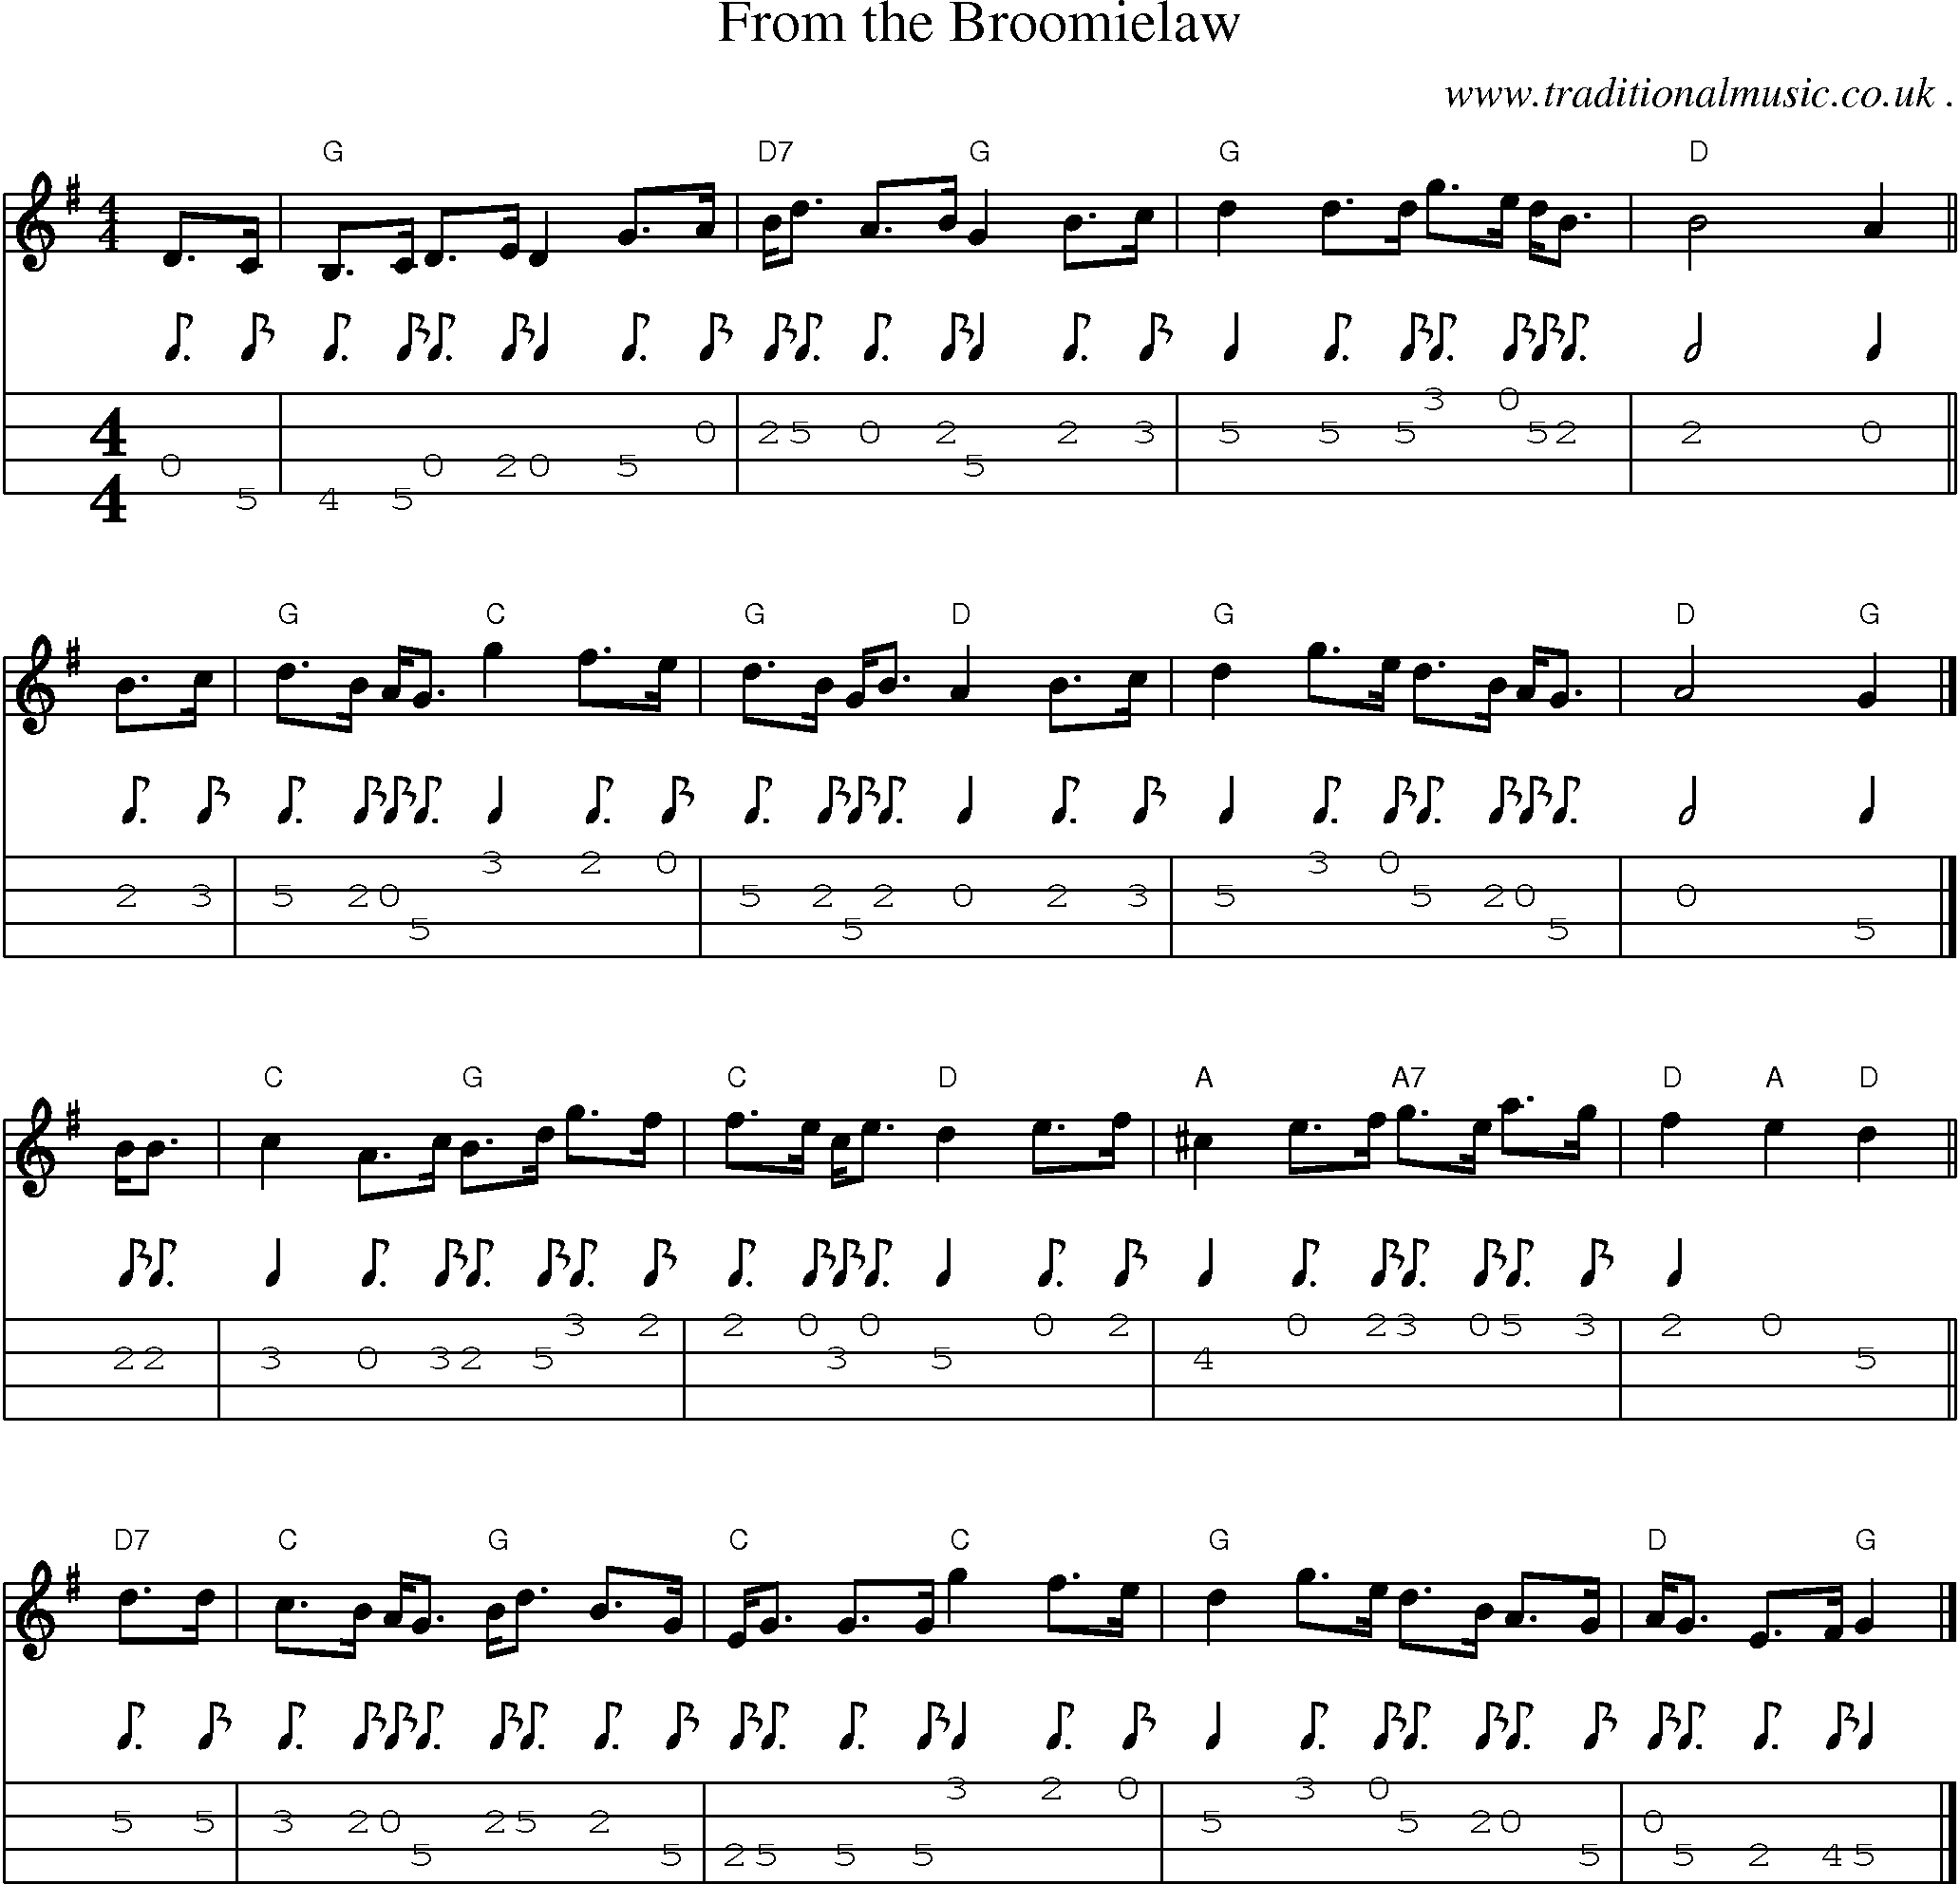 Sheet-music  score, Chords and Mandolin Tabs for From The Broomielaw